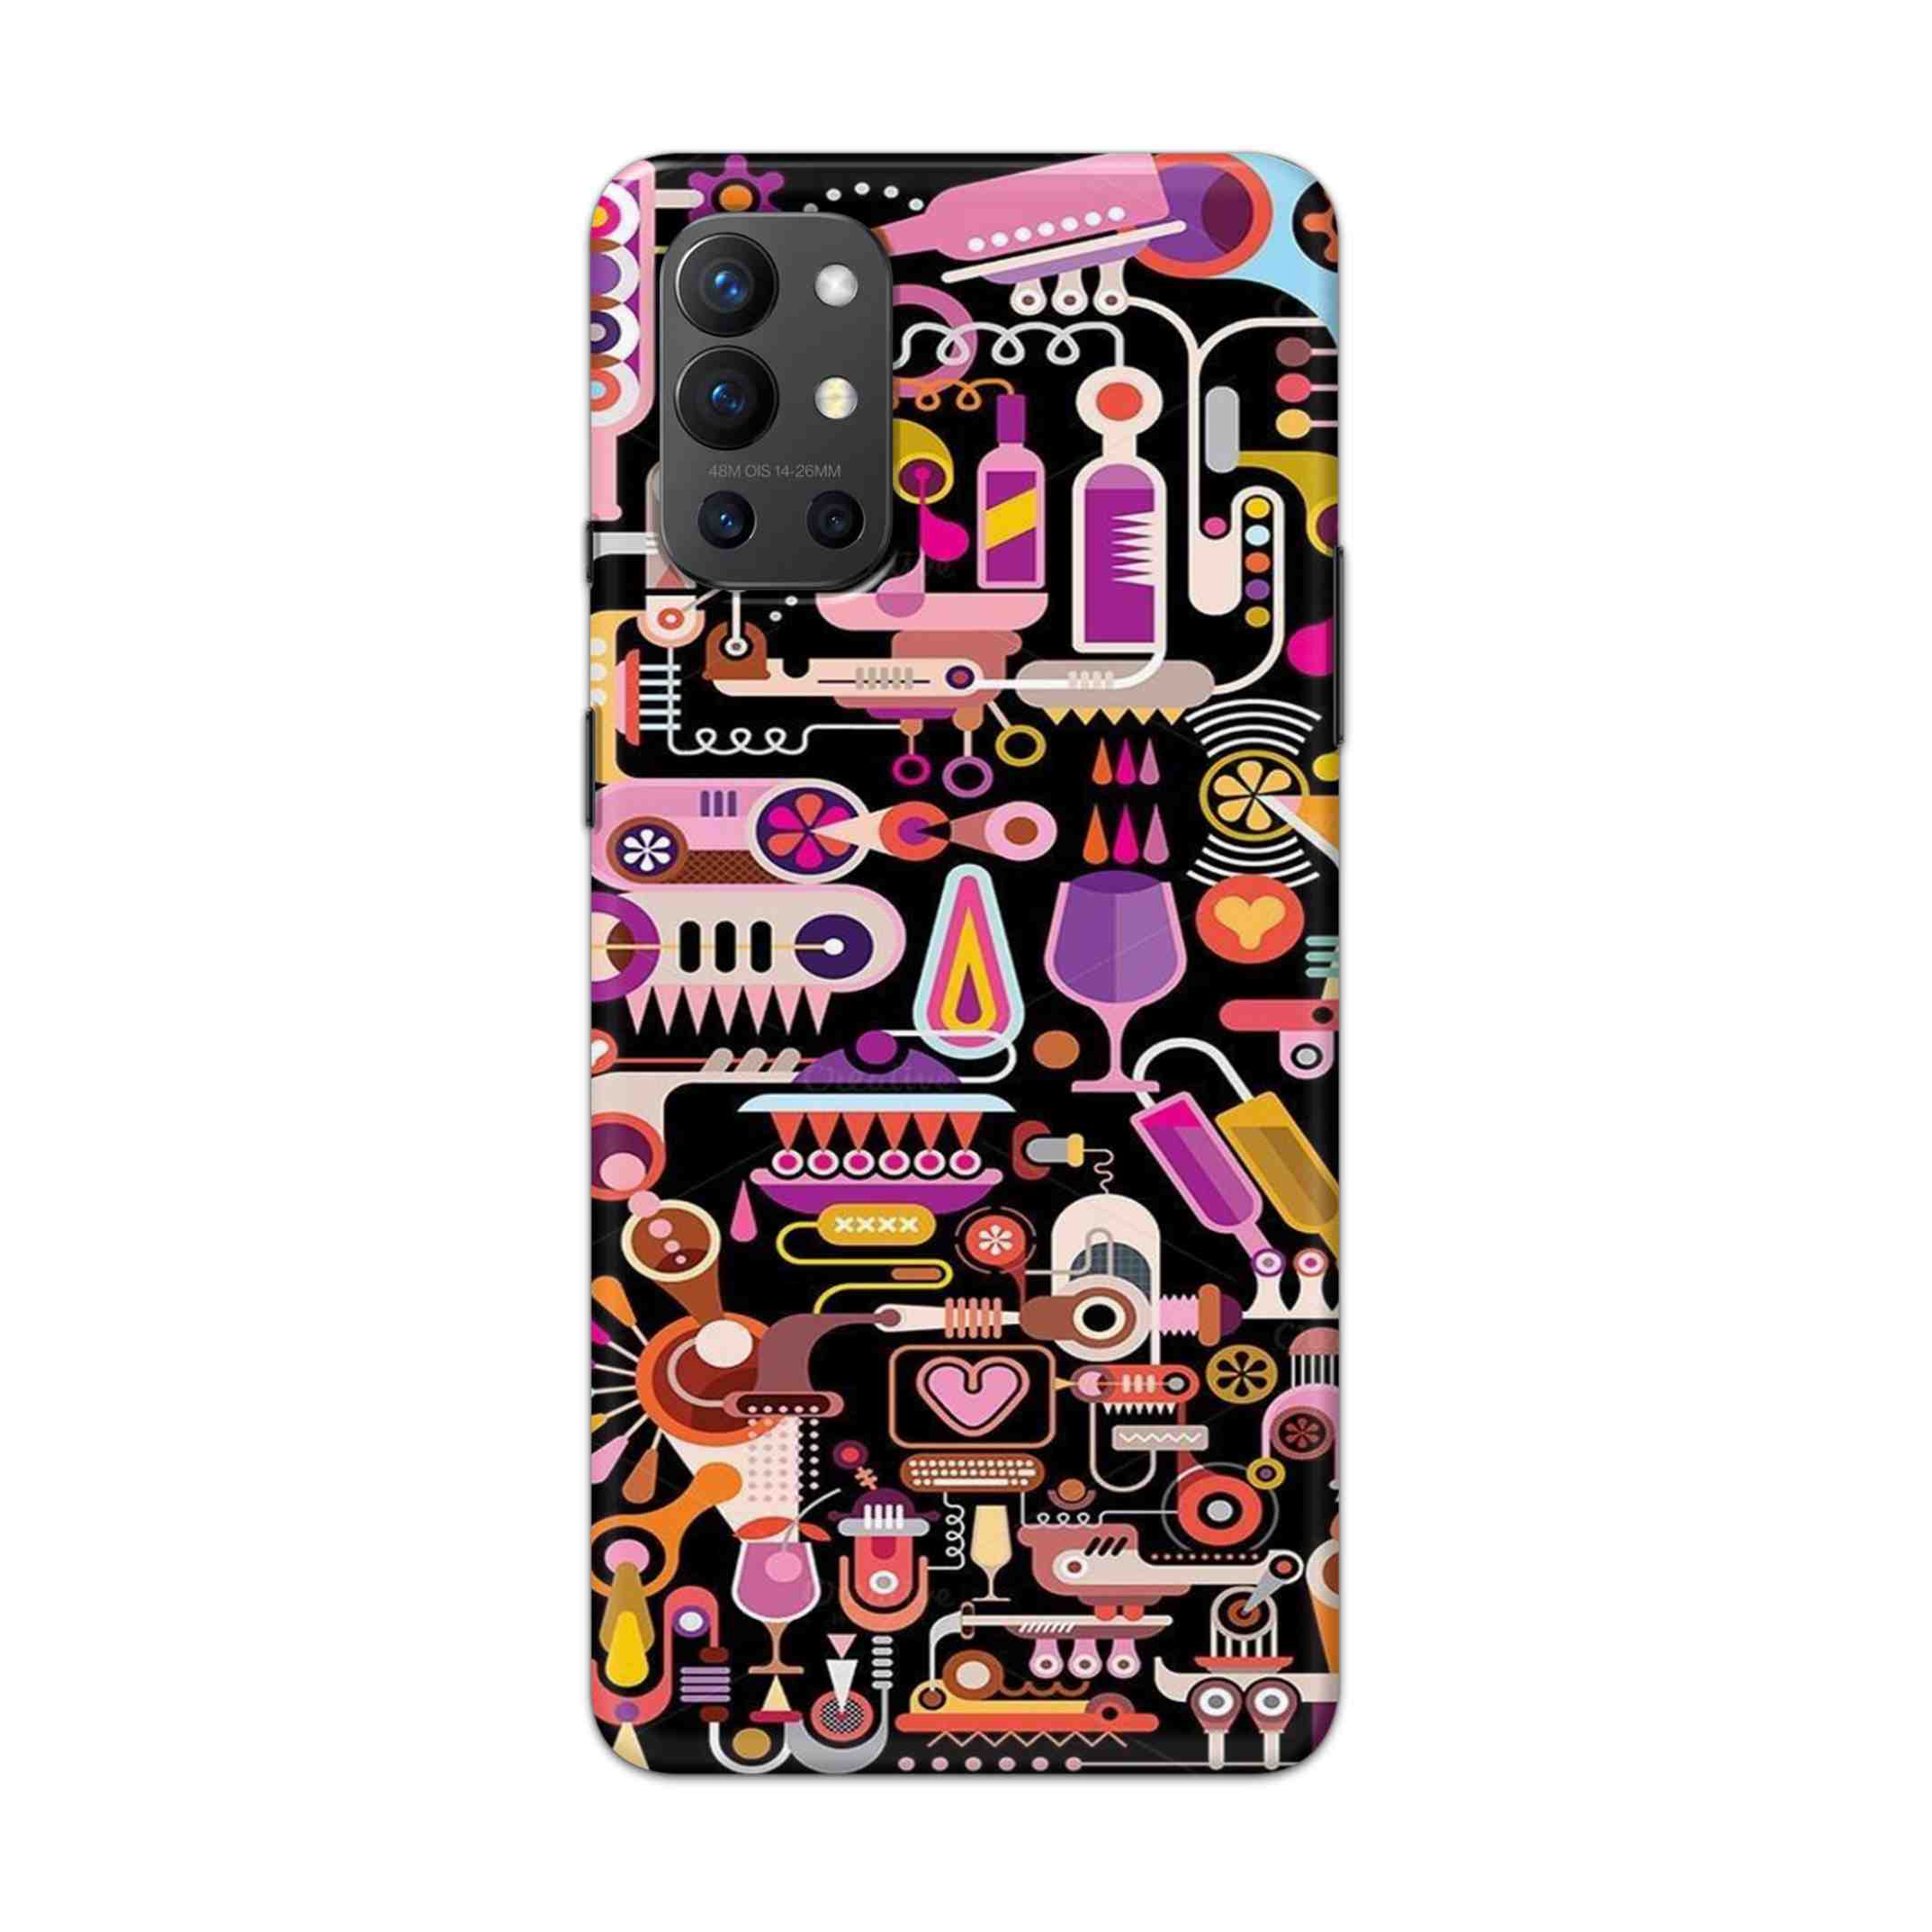 Buy Lab Art Hard Back Mobile Phone Case Cover For OnePlus 9R / 8T Online